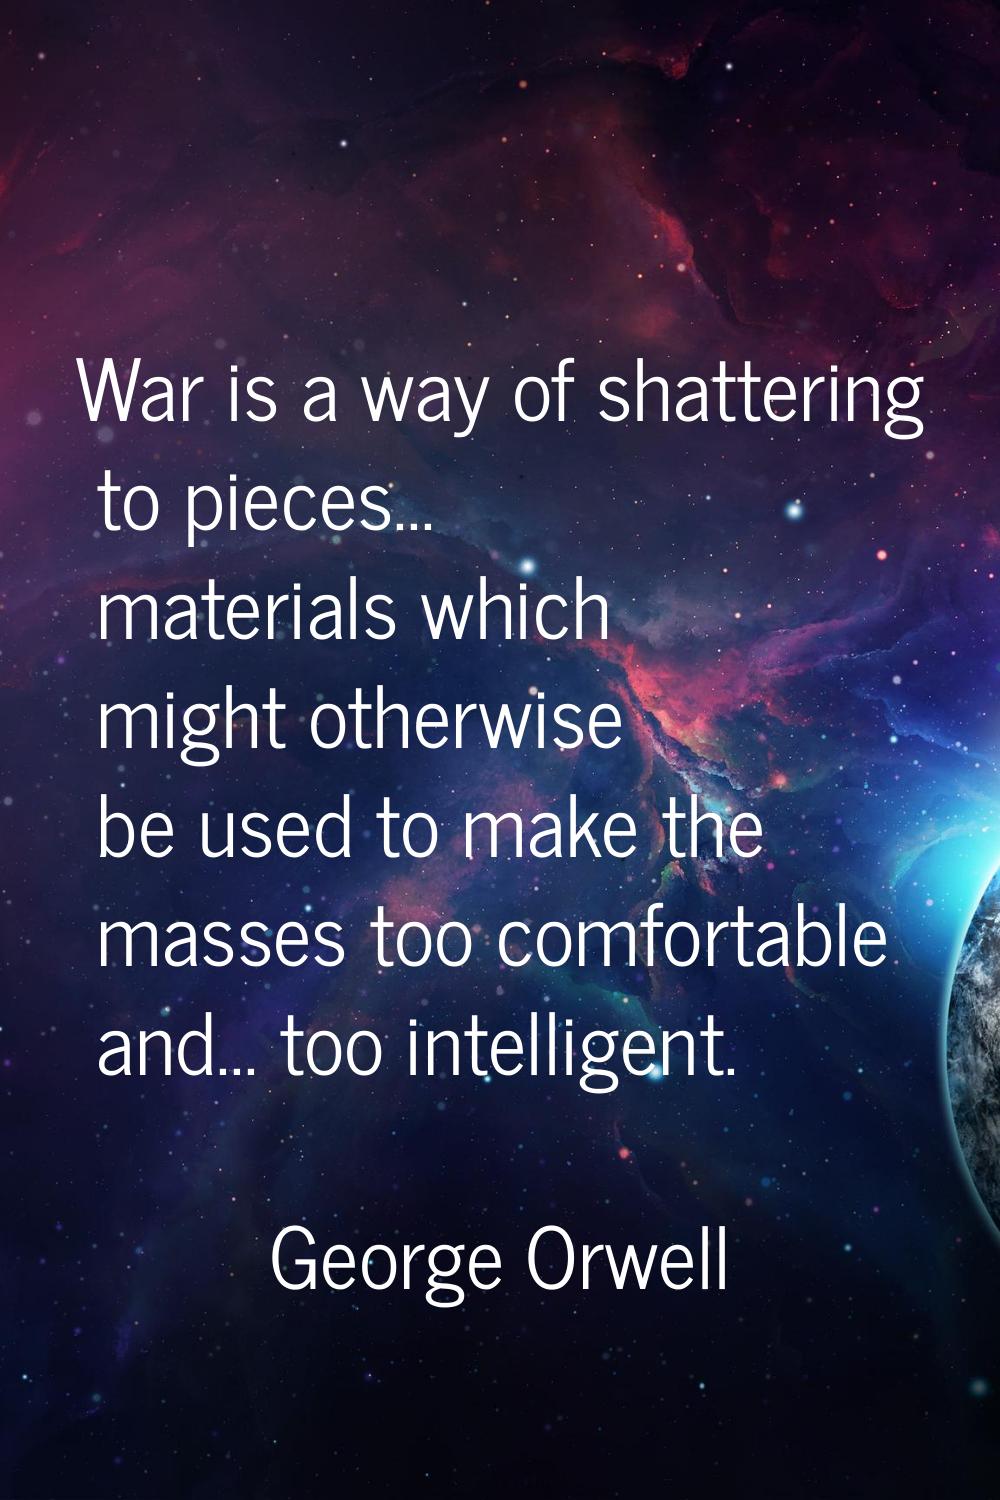 War is a way of shattering to pieces... materials which might otherwise be used to make the masses 